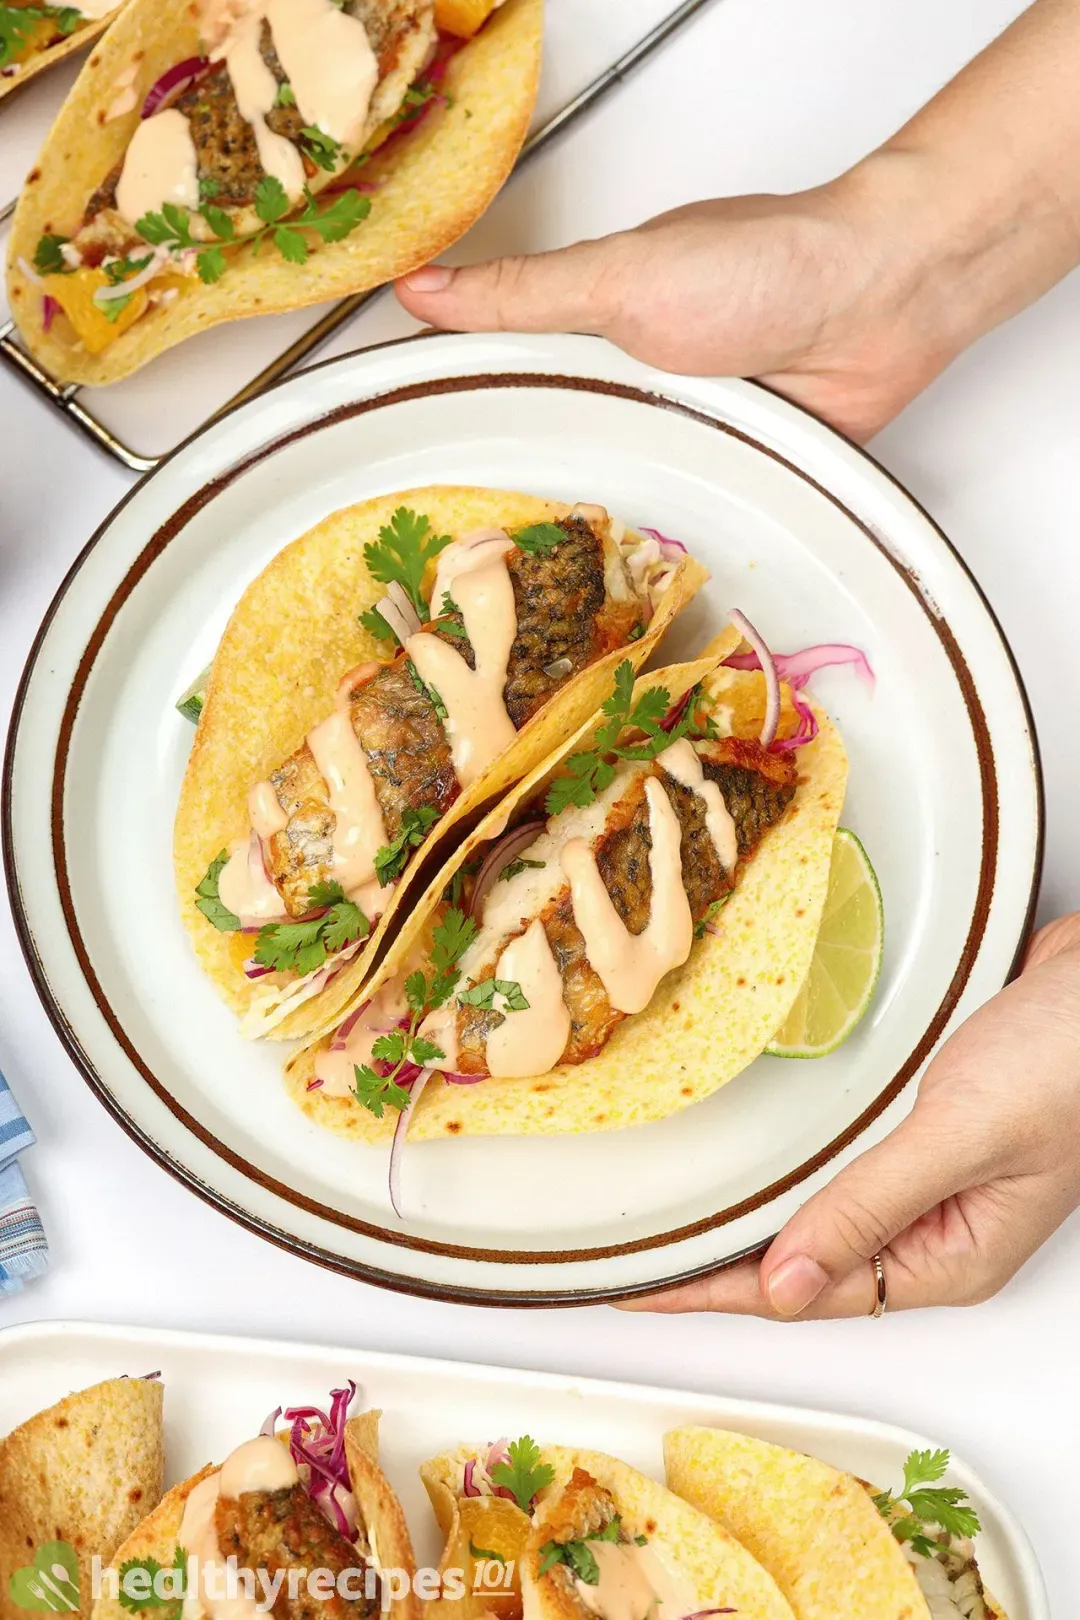 What to Serve with Sea Bass Tacos